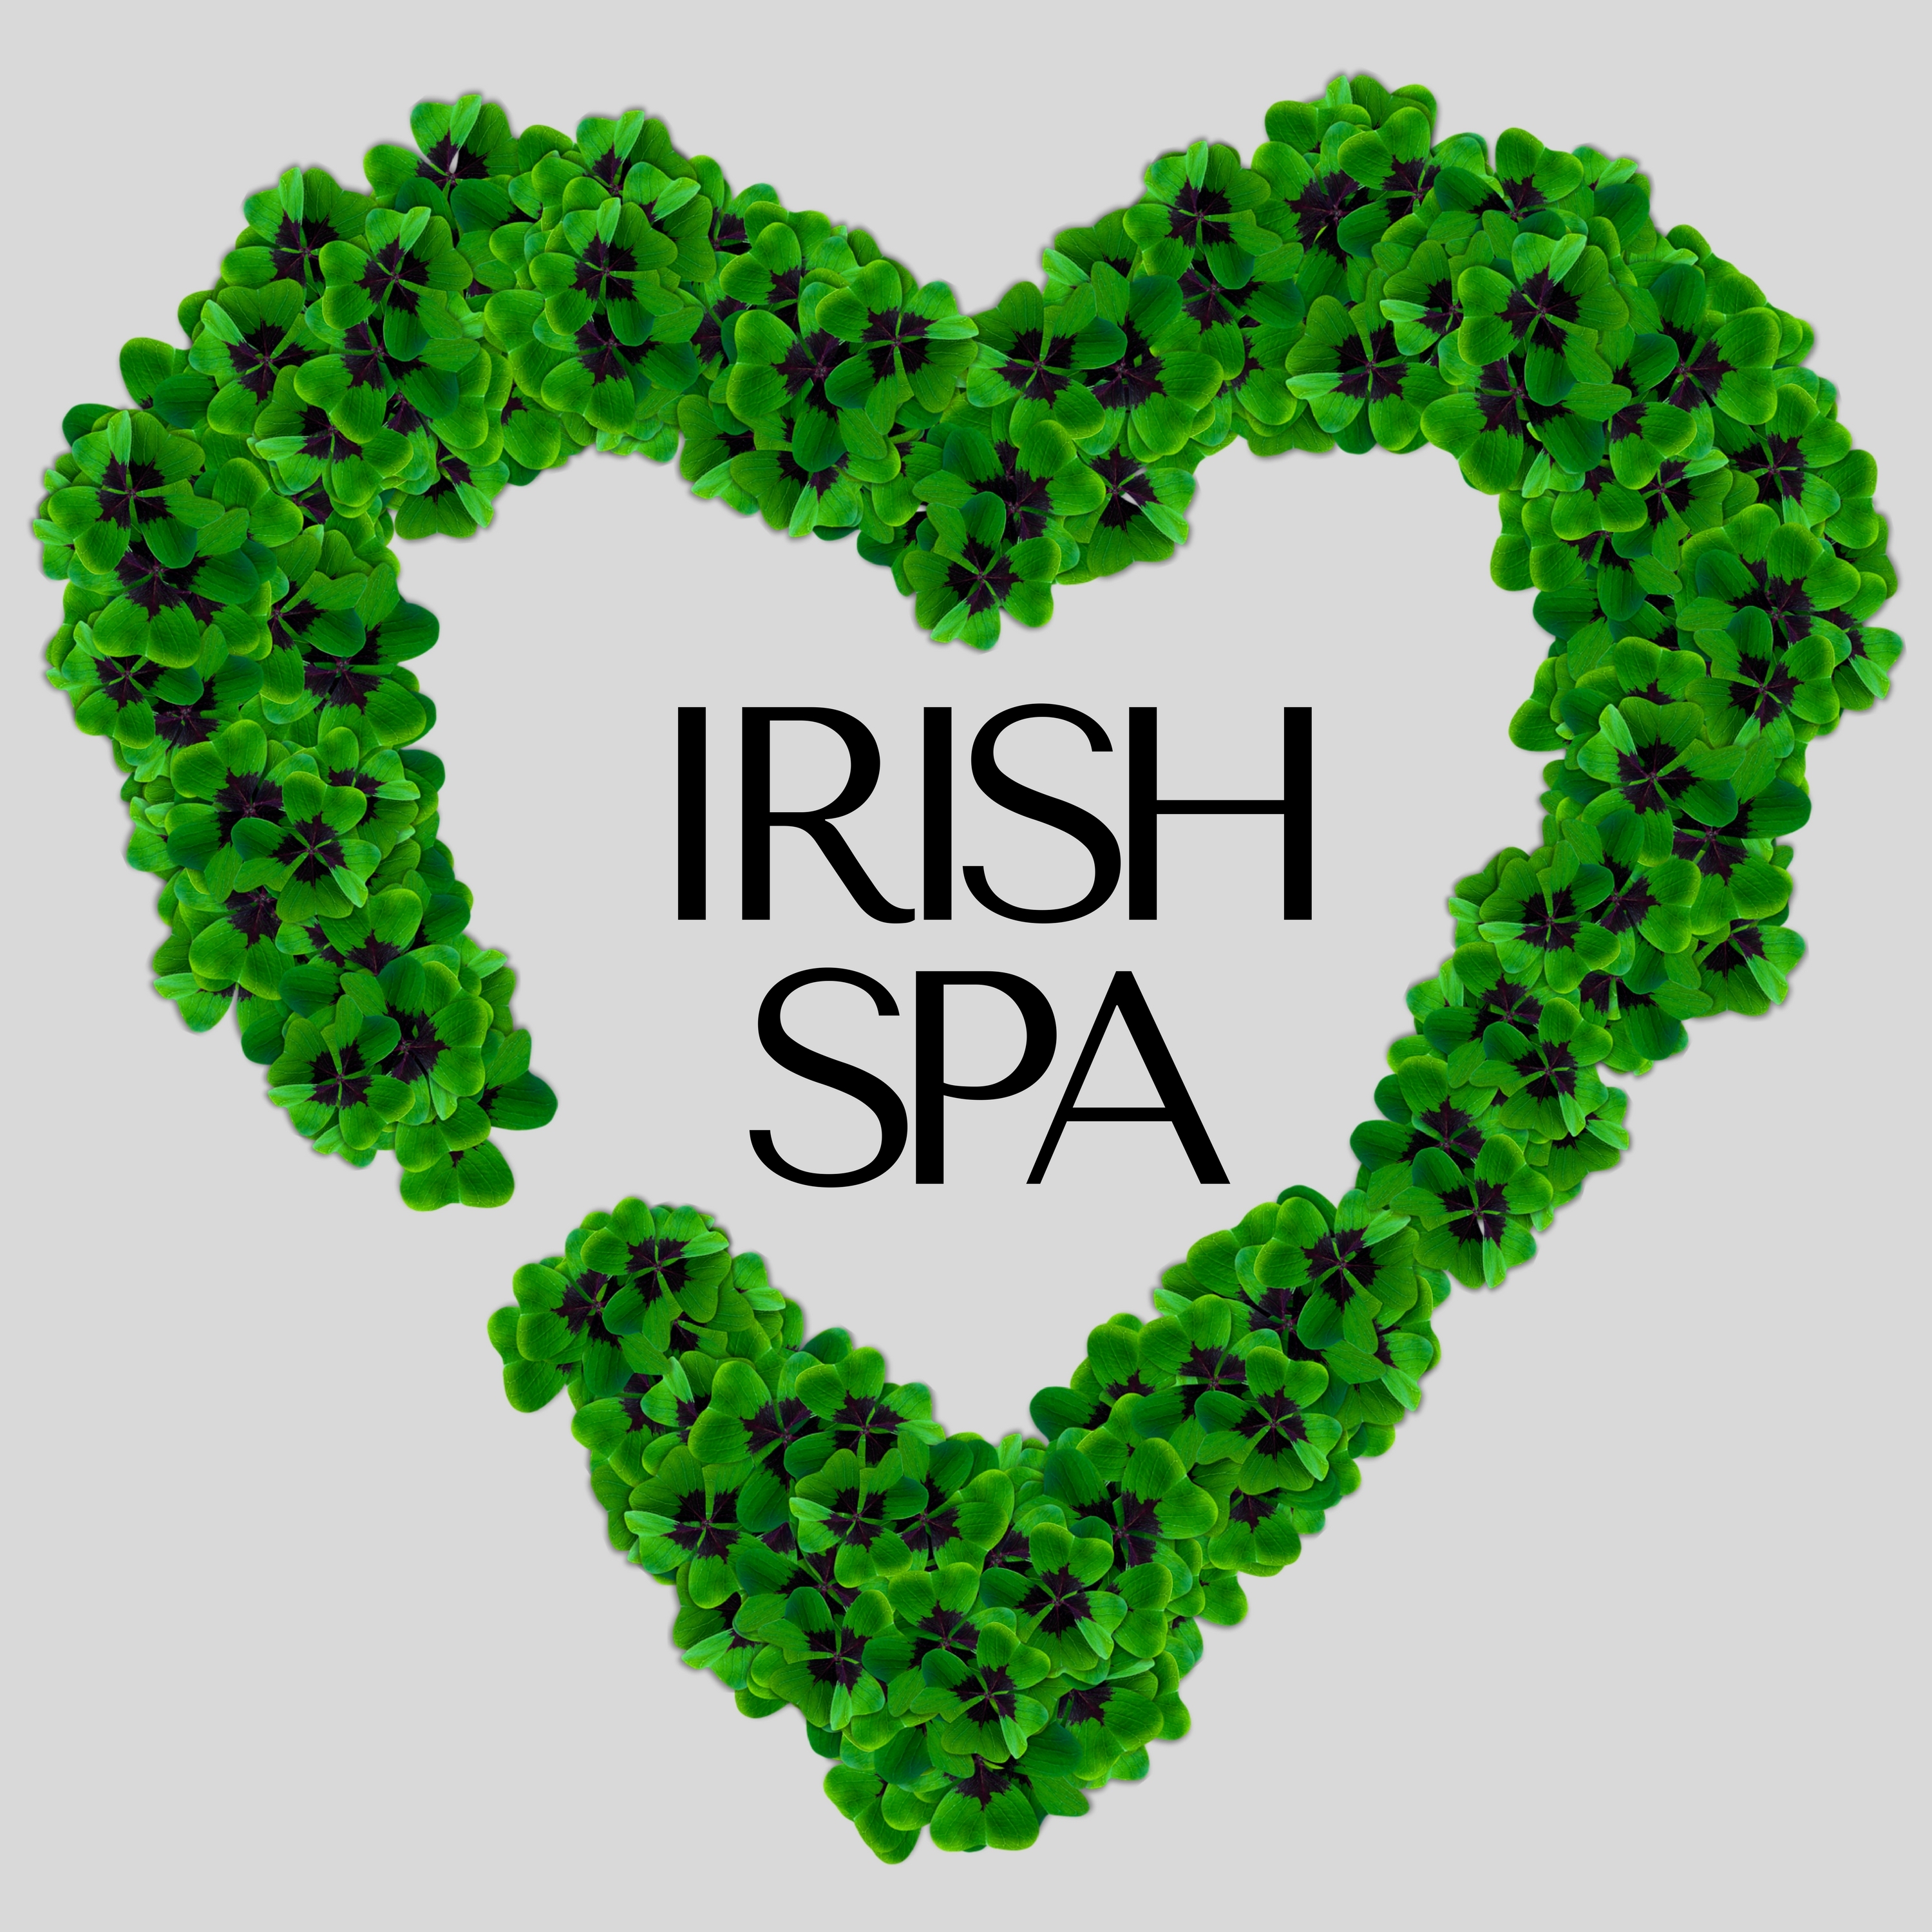 Irish Spa: The Most Relaxing Traditional Celtic Songs for Spas & Wellness Centers with the Most Beautiful Sounds of Nature